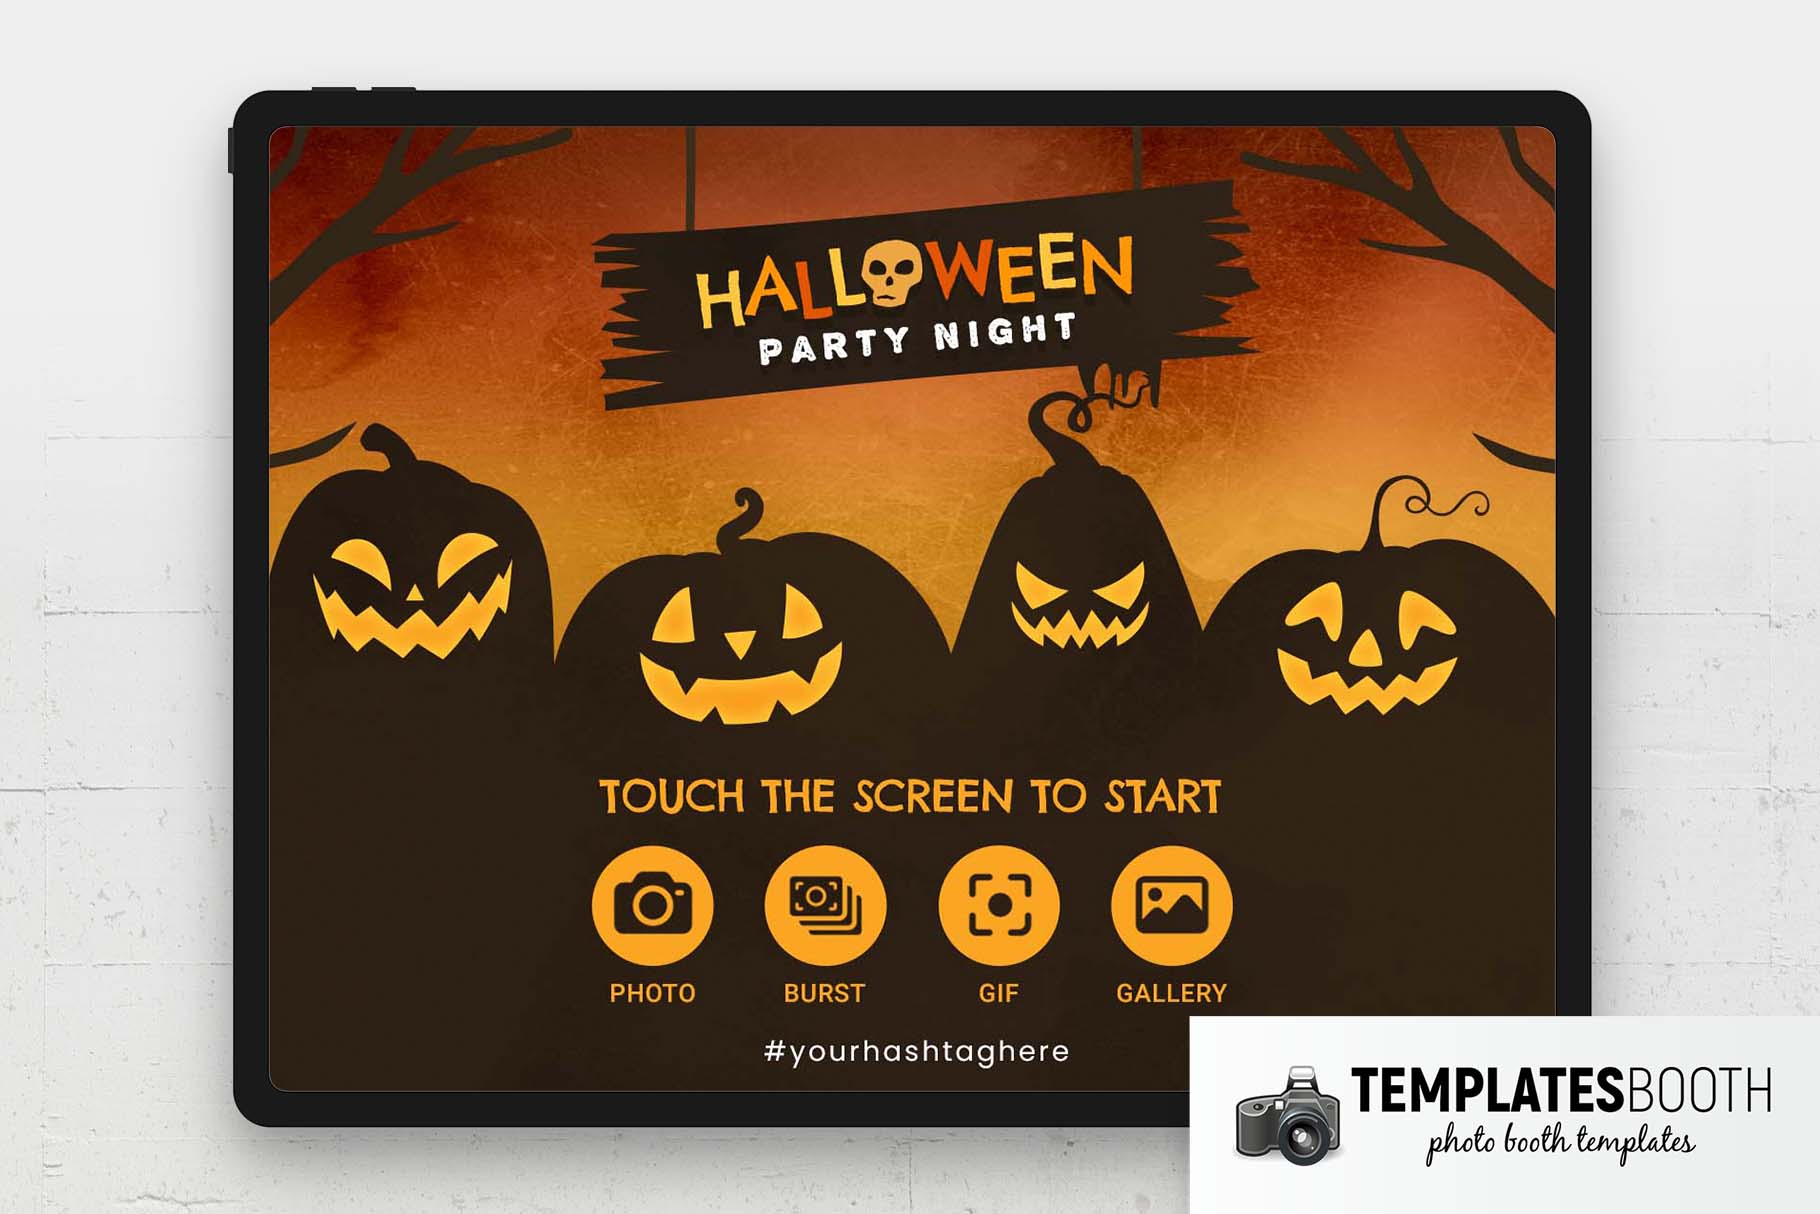 Halloween Party Night Photo Booth Welcome Screen